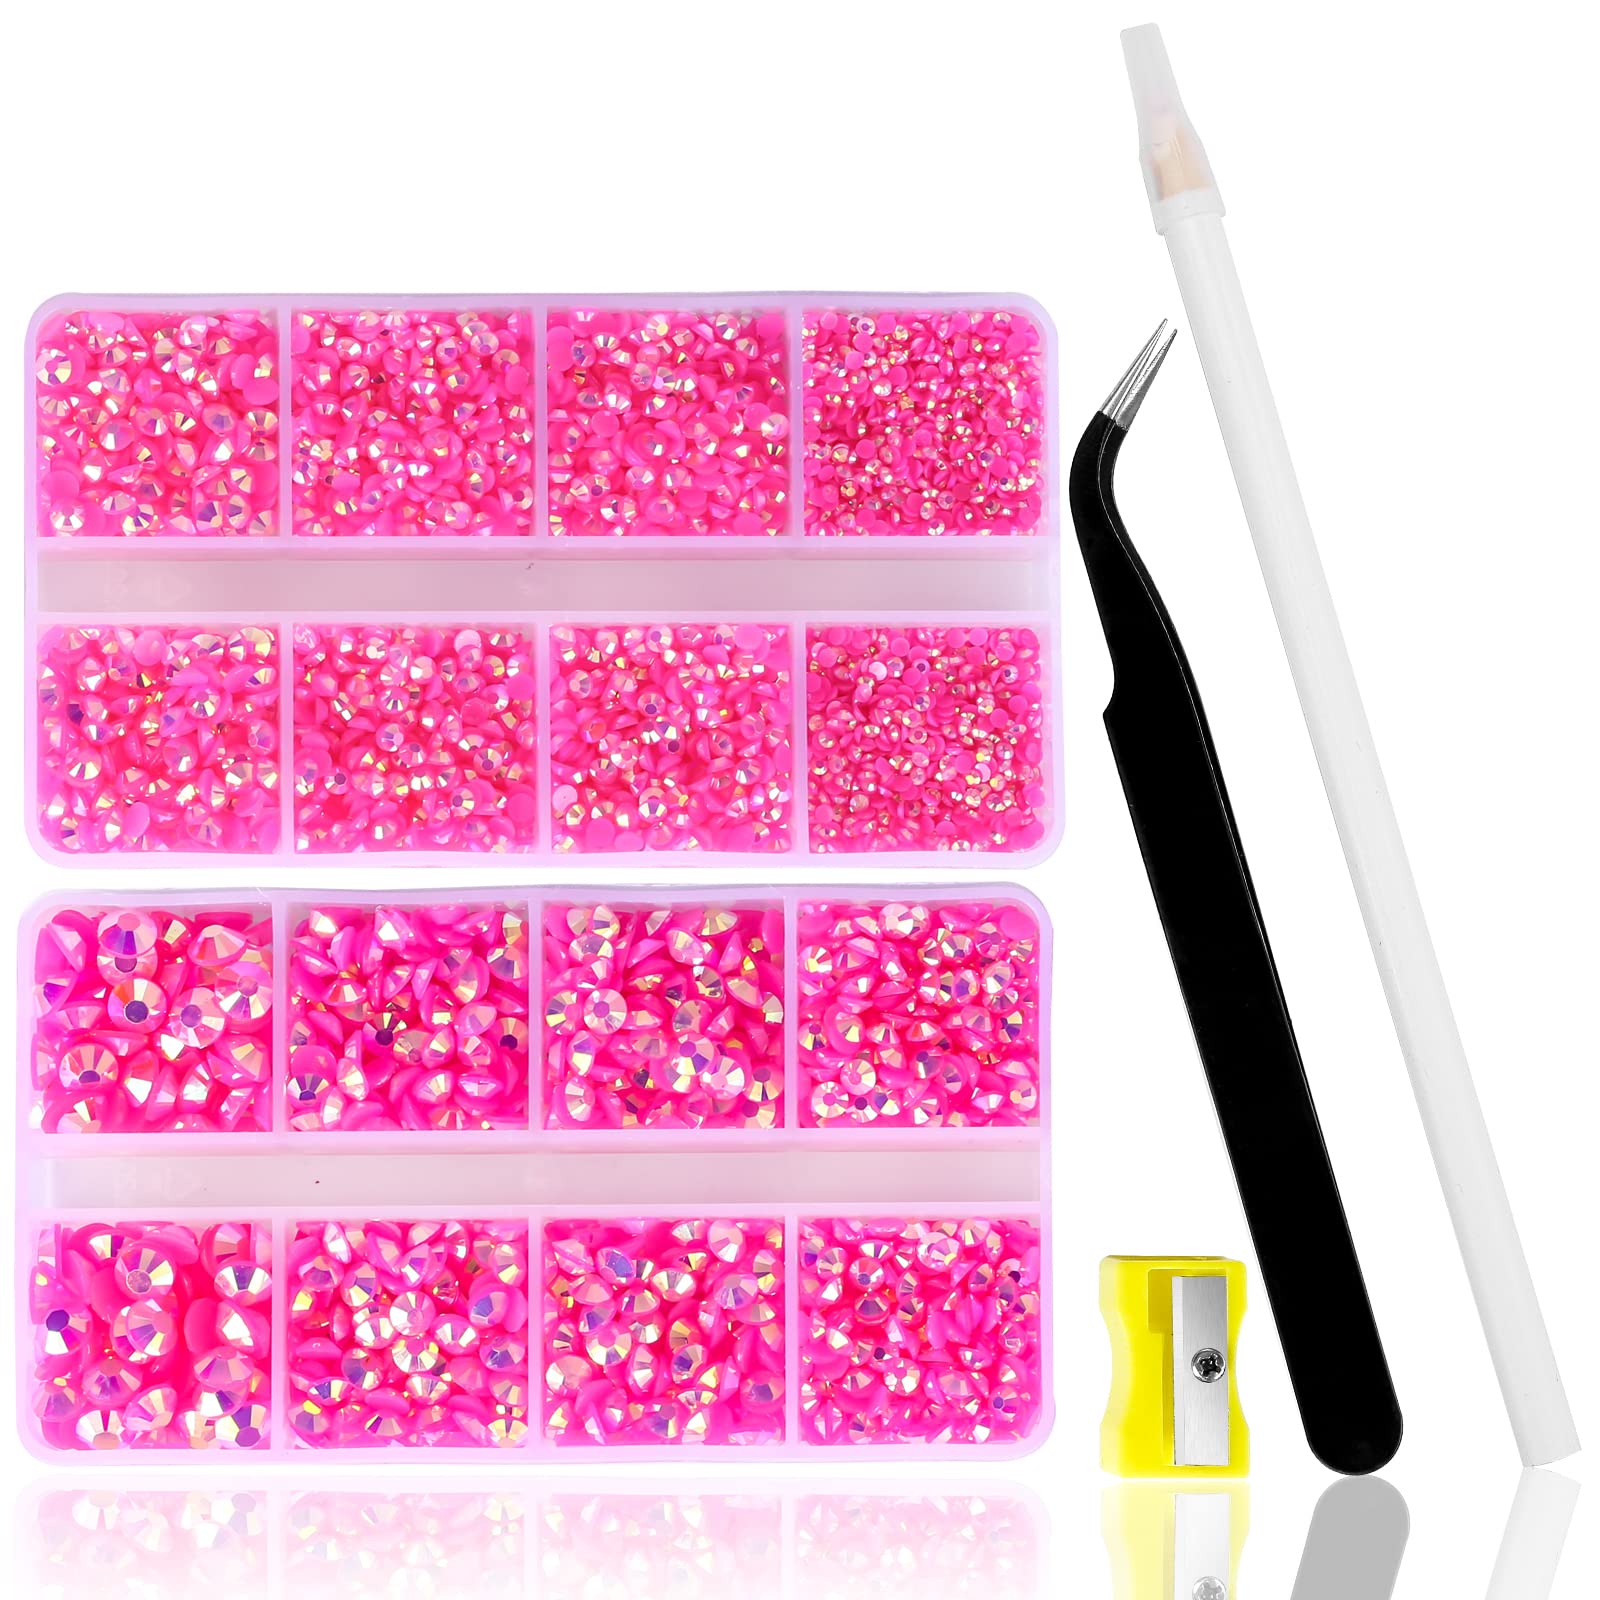 10400PCS Hot Pink Rhinestones, Jelly Resin Rhinestones for Nails, Flatback  Non Hotfix Crystals DIY Rhinestones for Crafts with 15 cm Pencil Sharpener  and Tweezer & Picker Pen (Rose AB)